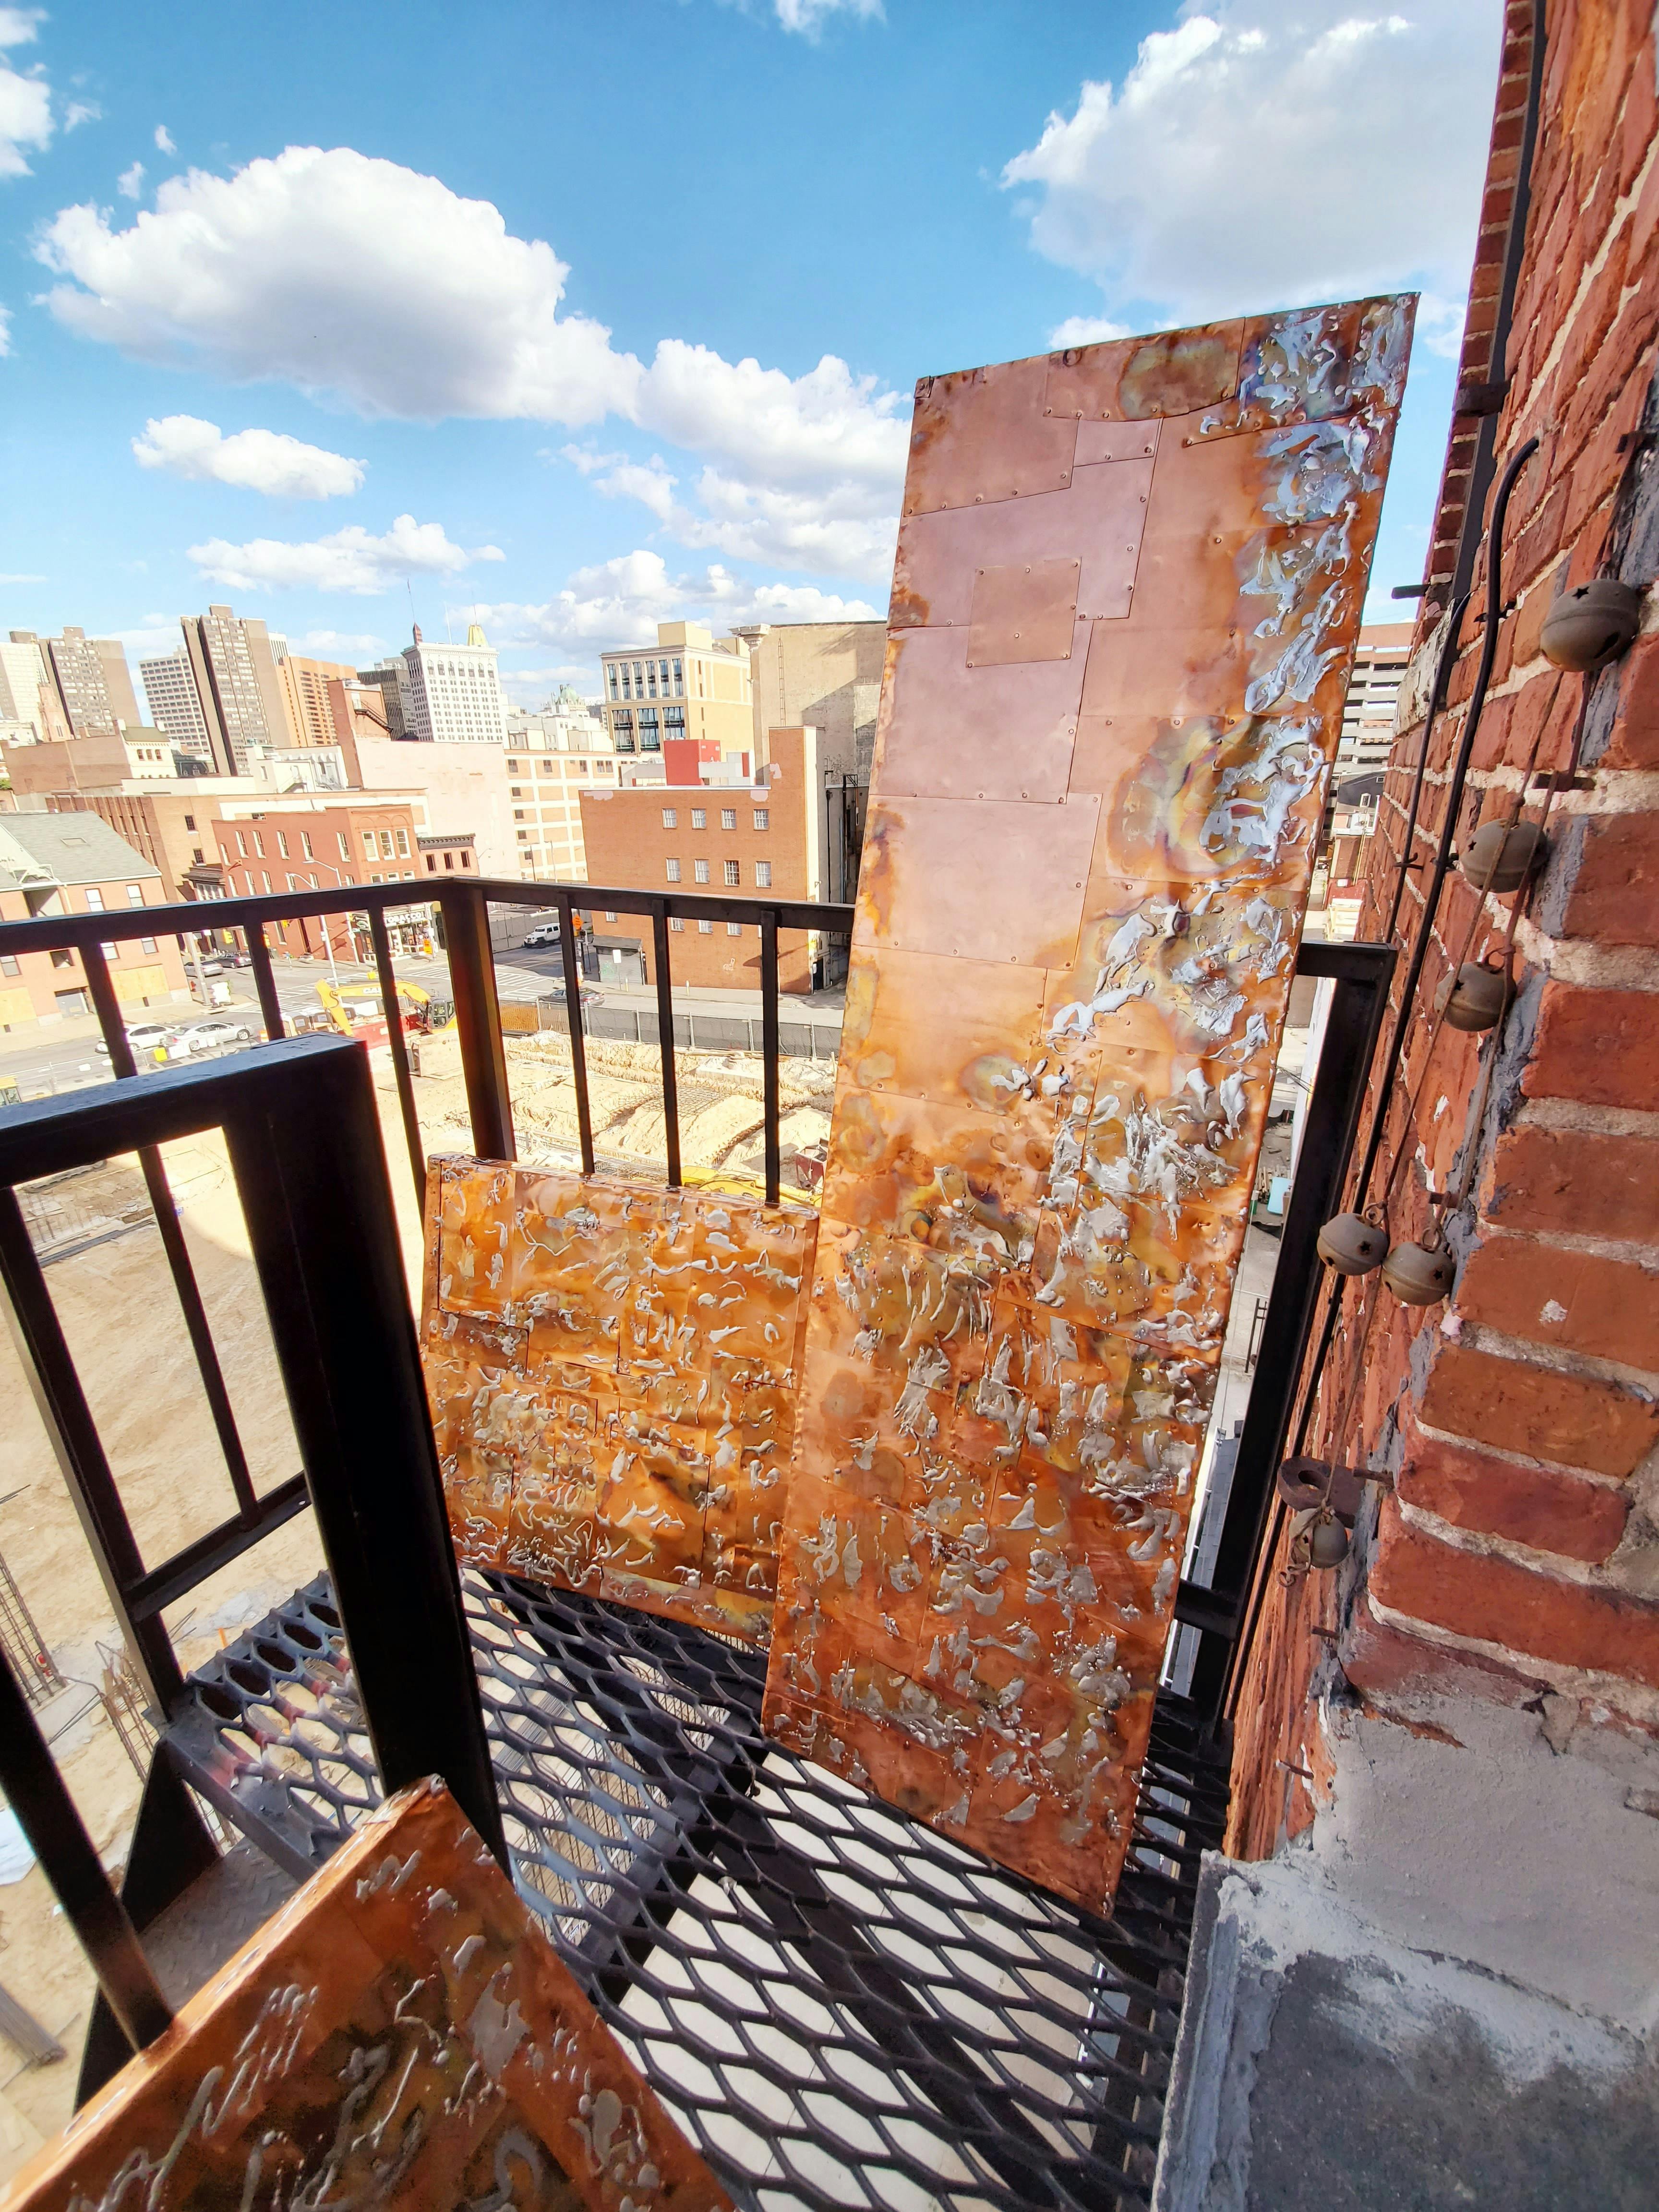 series of rectangule wallhangings featuring textured copper arranged on fire escape overlooking a city on a sunny day